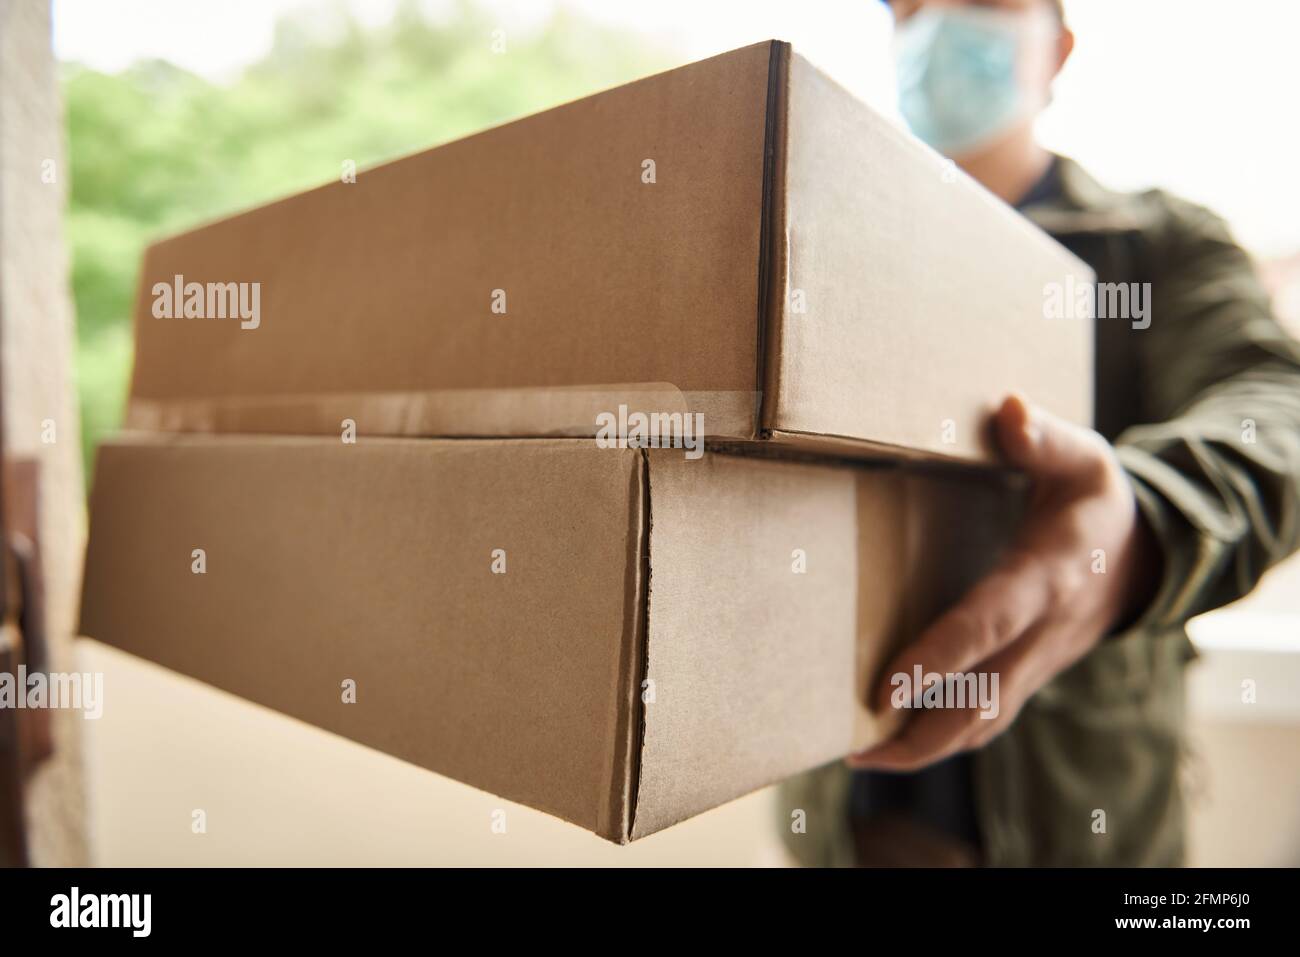 Delivery man holding up packages at a customer's door Stock Photo